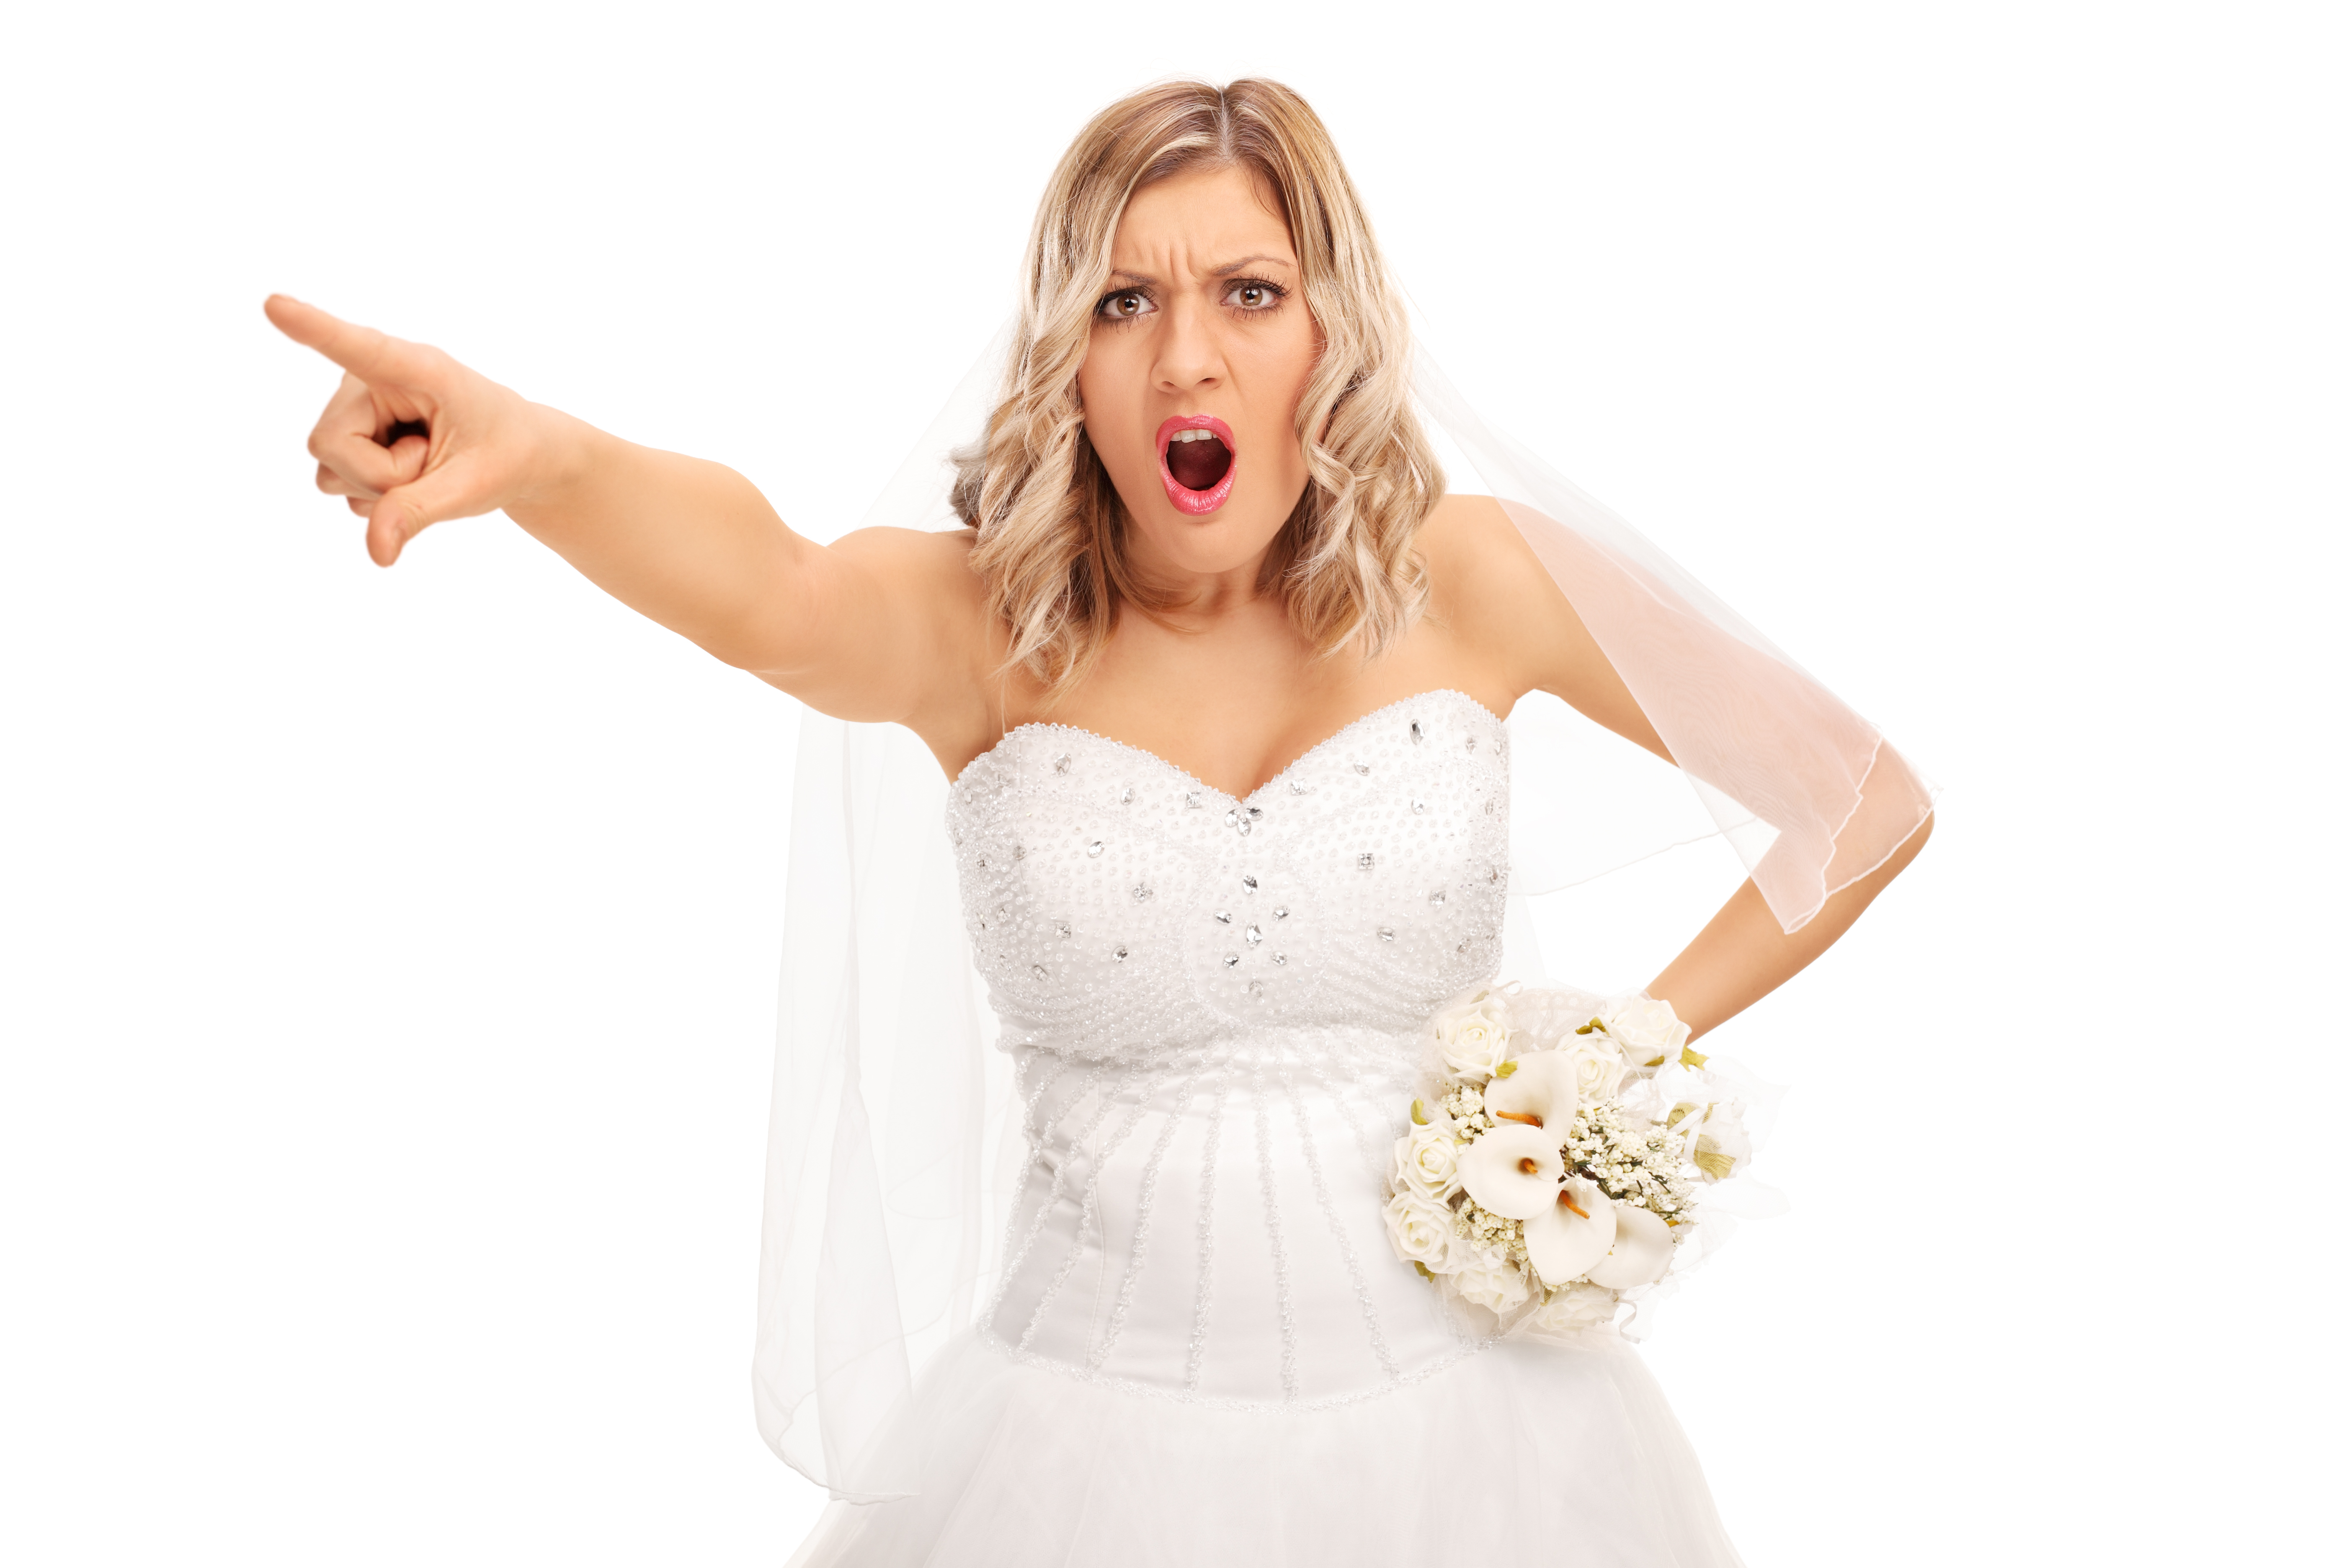 An angry bride pointing | Source: Shutterstock